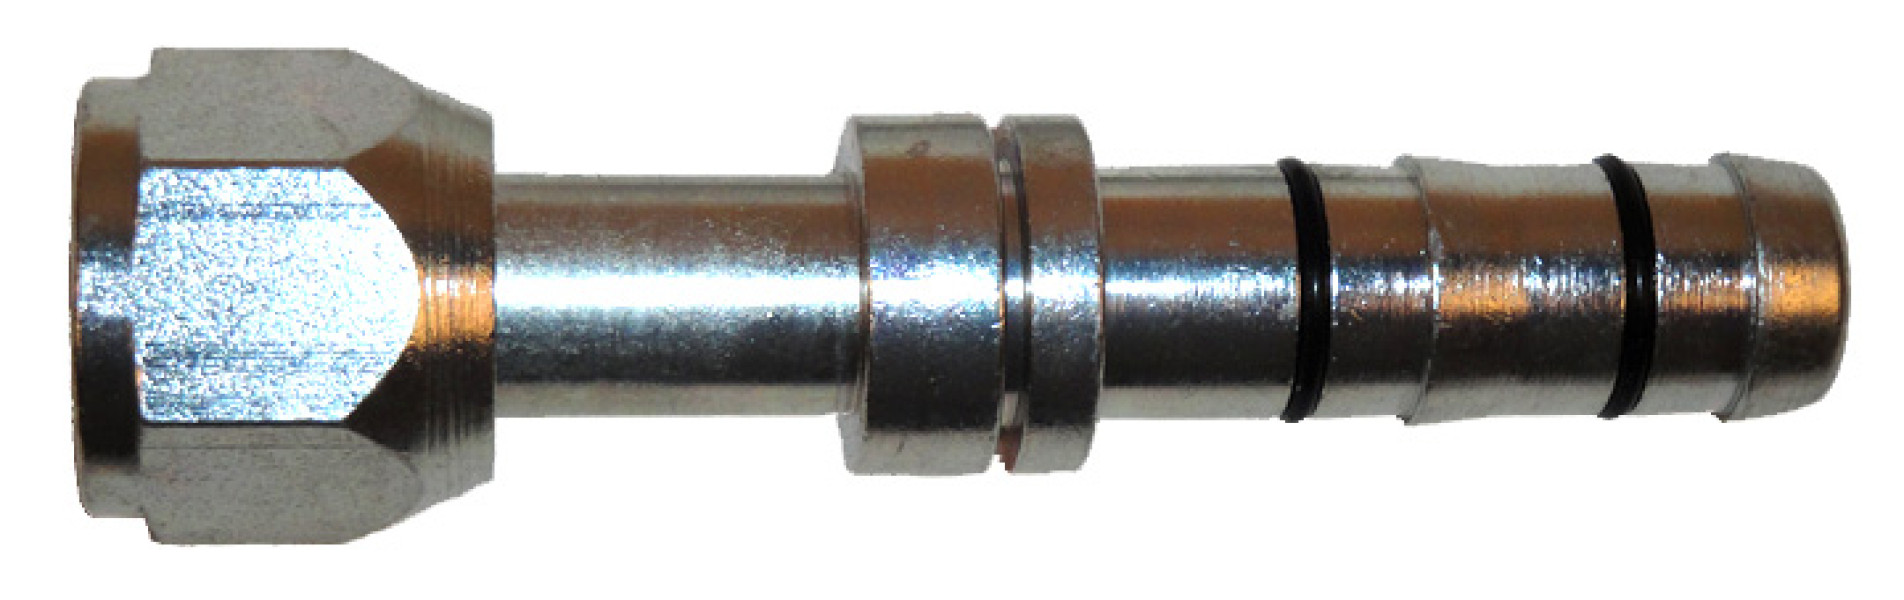 Image of A/C Refrigerant Hose Fitting from Sunair. Part number: FJ5984-0810S